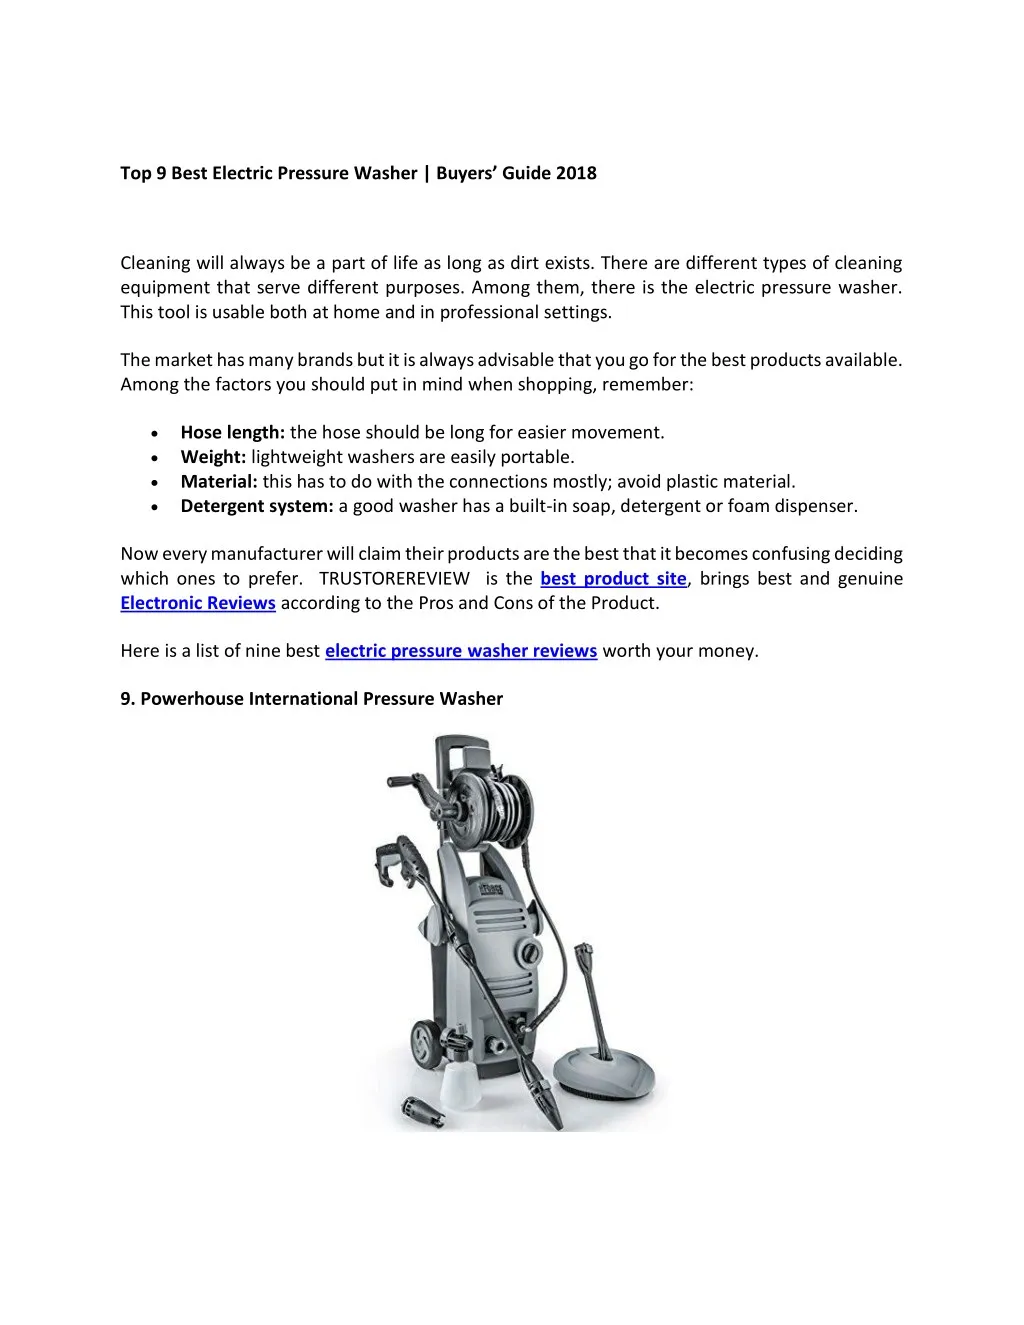 to p 9 best electric pressure washer buyers guide